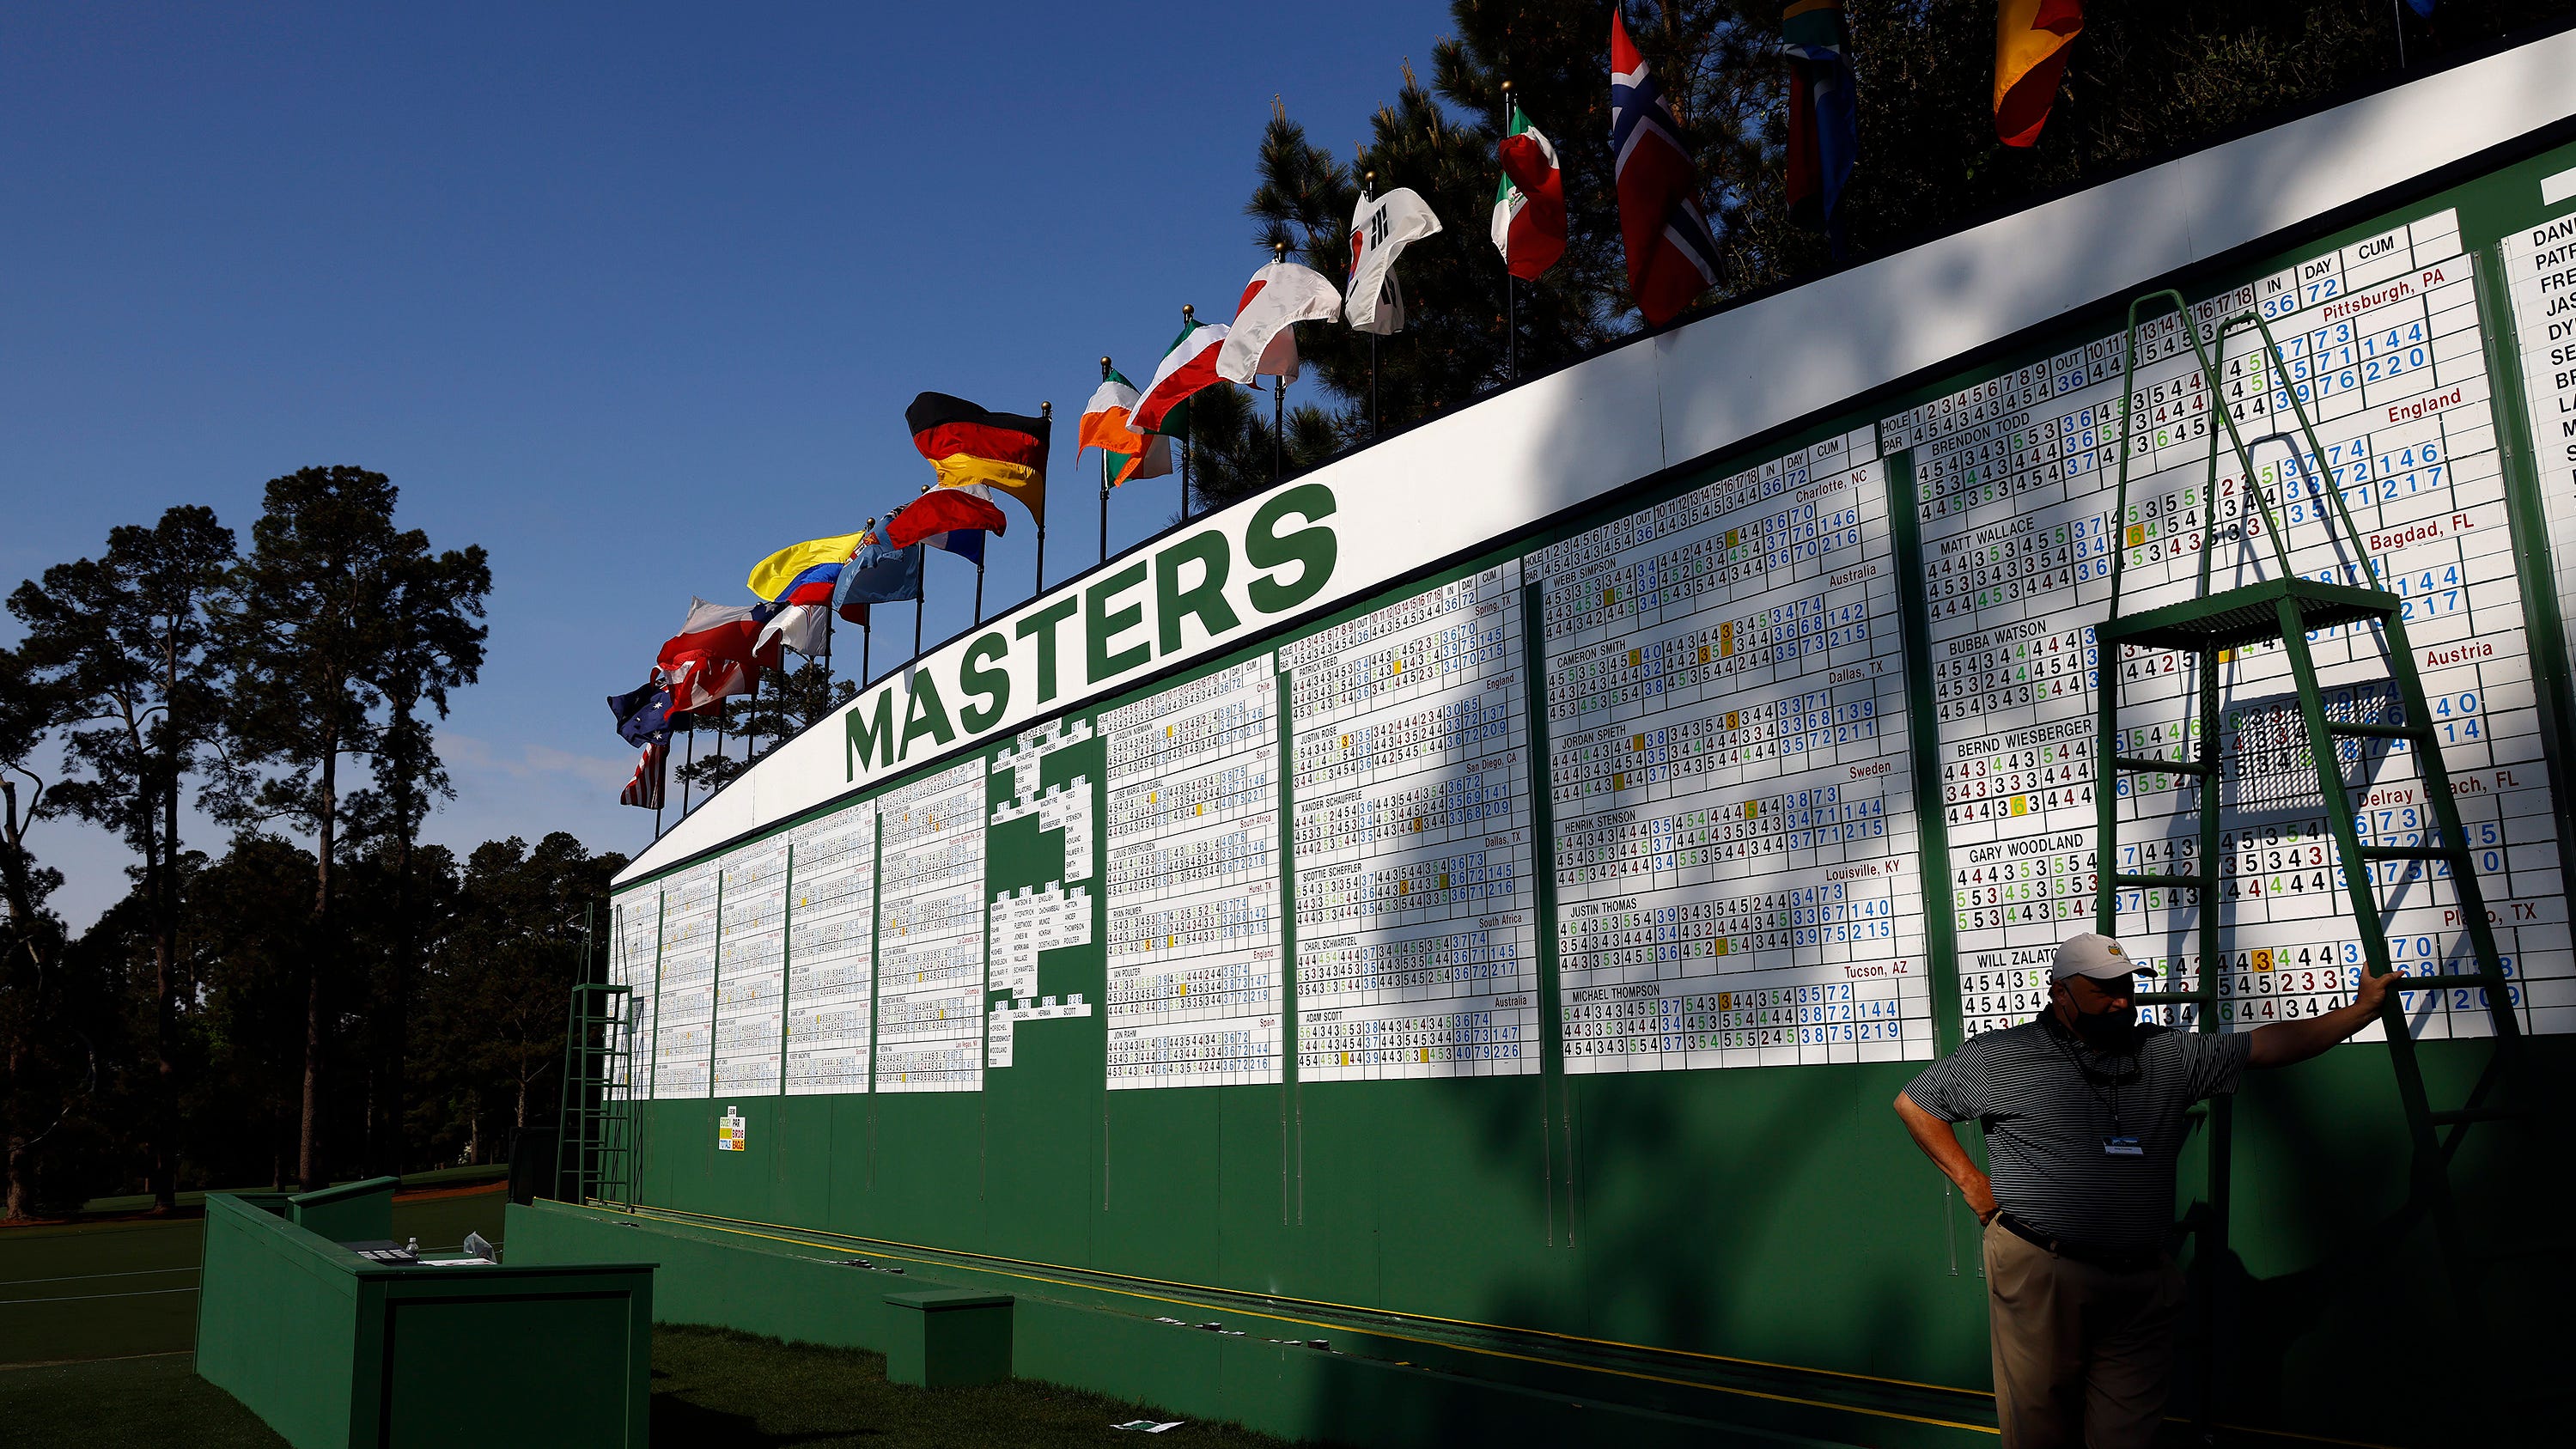 How to get tickets to the 2022 Masters golf tournament at Augusta